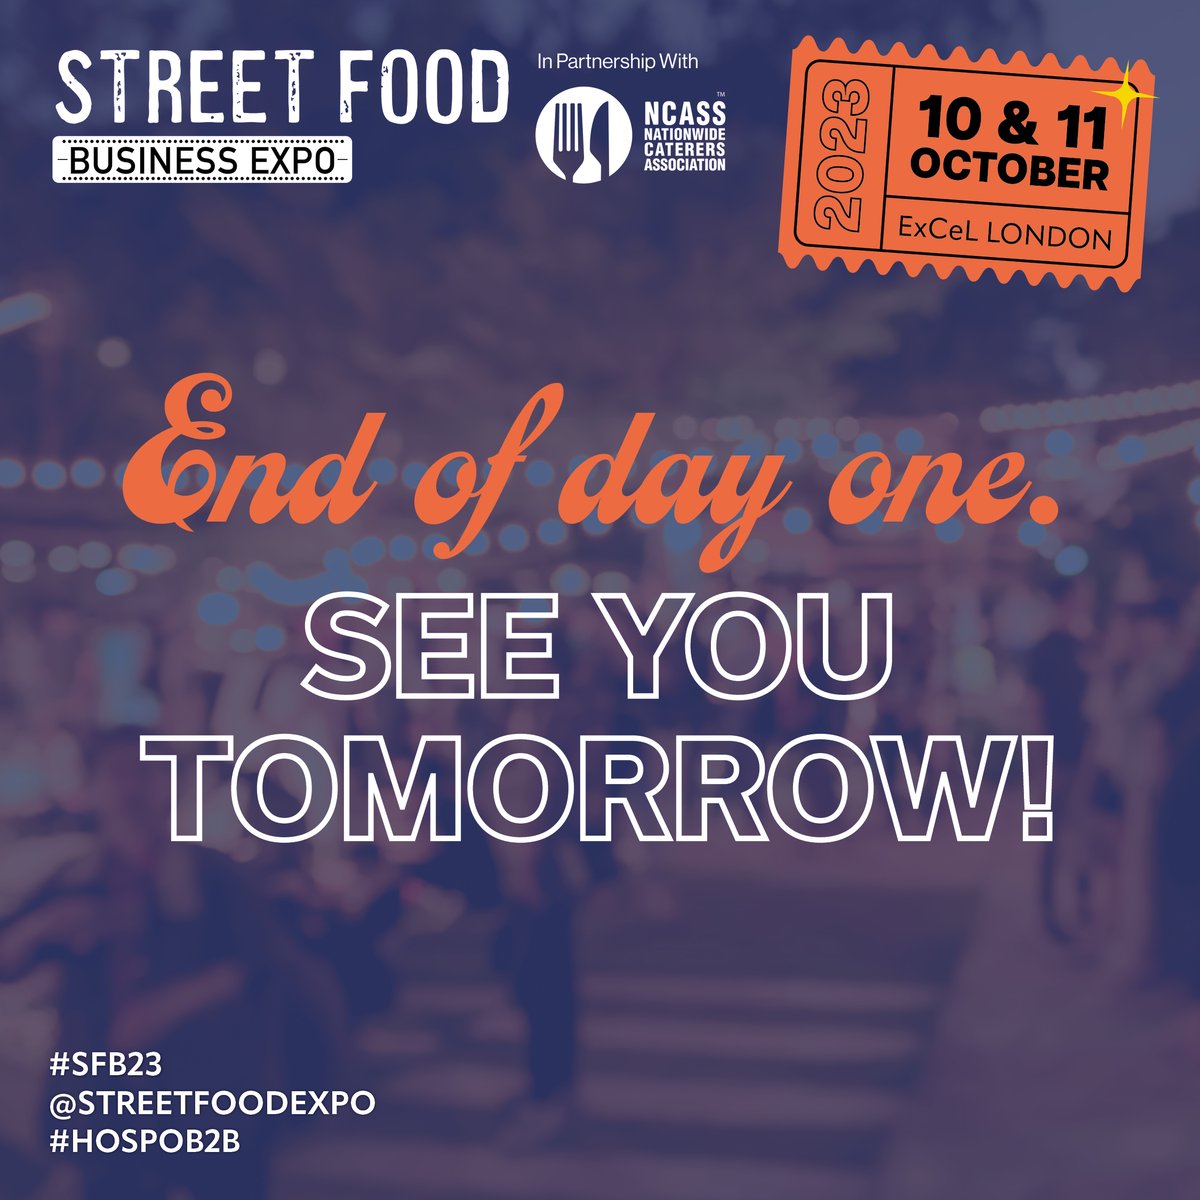 🌟 Amazing Day One at Street Food Business Expo! 🌟

Missed something? Don't worry; we have more in store tomorrow!

Lost your ticket? We'll reprint it at the entrance.

See you at 10am tomorrow! 🕙
#SFBE23 #DayOne #StreetFood